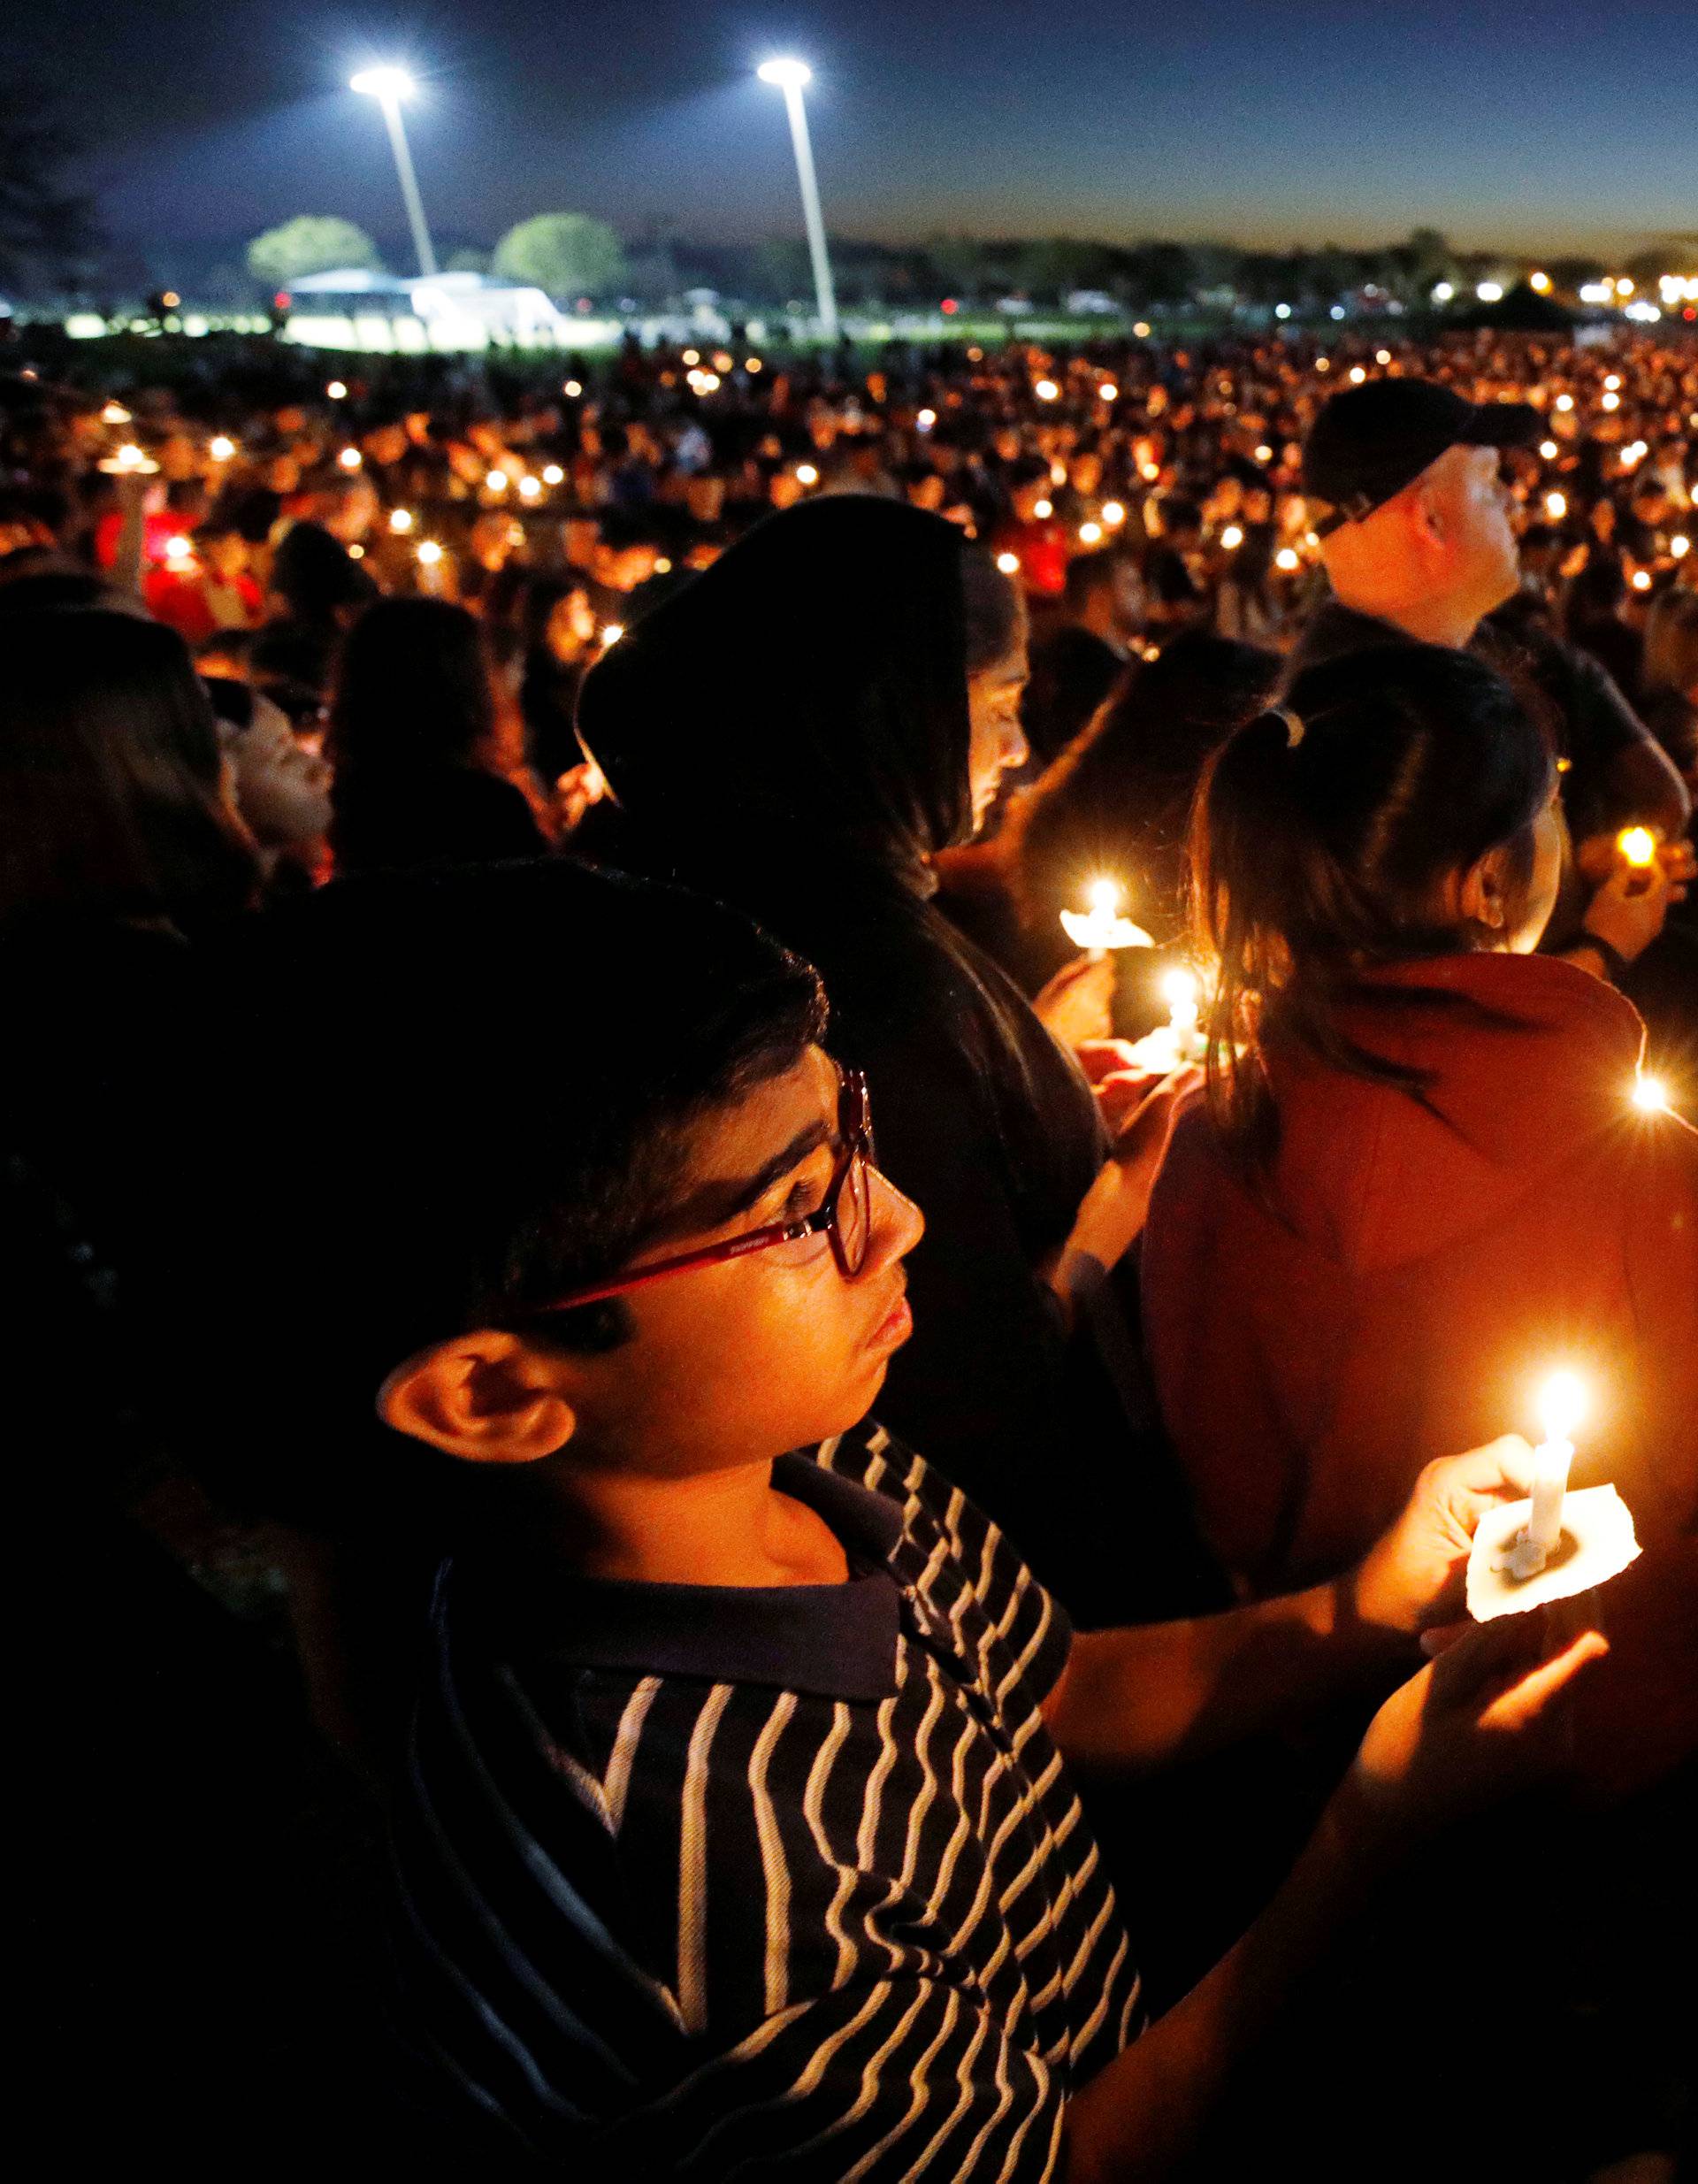 People attend a candlelight vigil the day after a shooting at Marjory Stoneman Douglas High School in Parkland